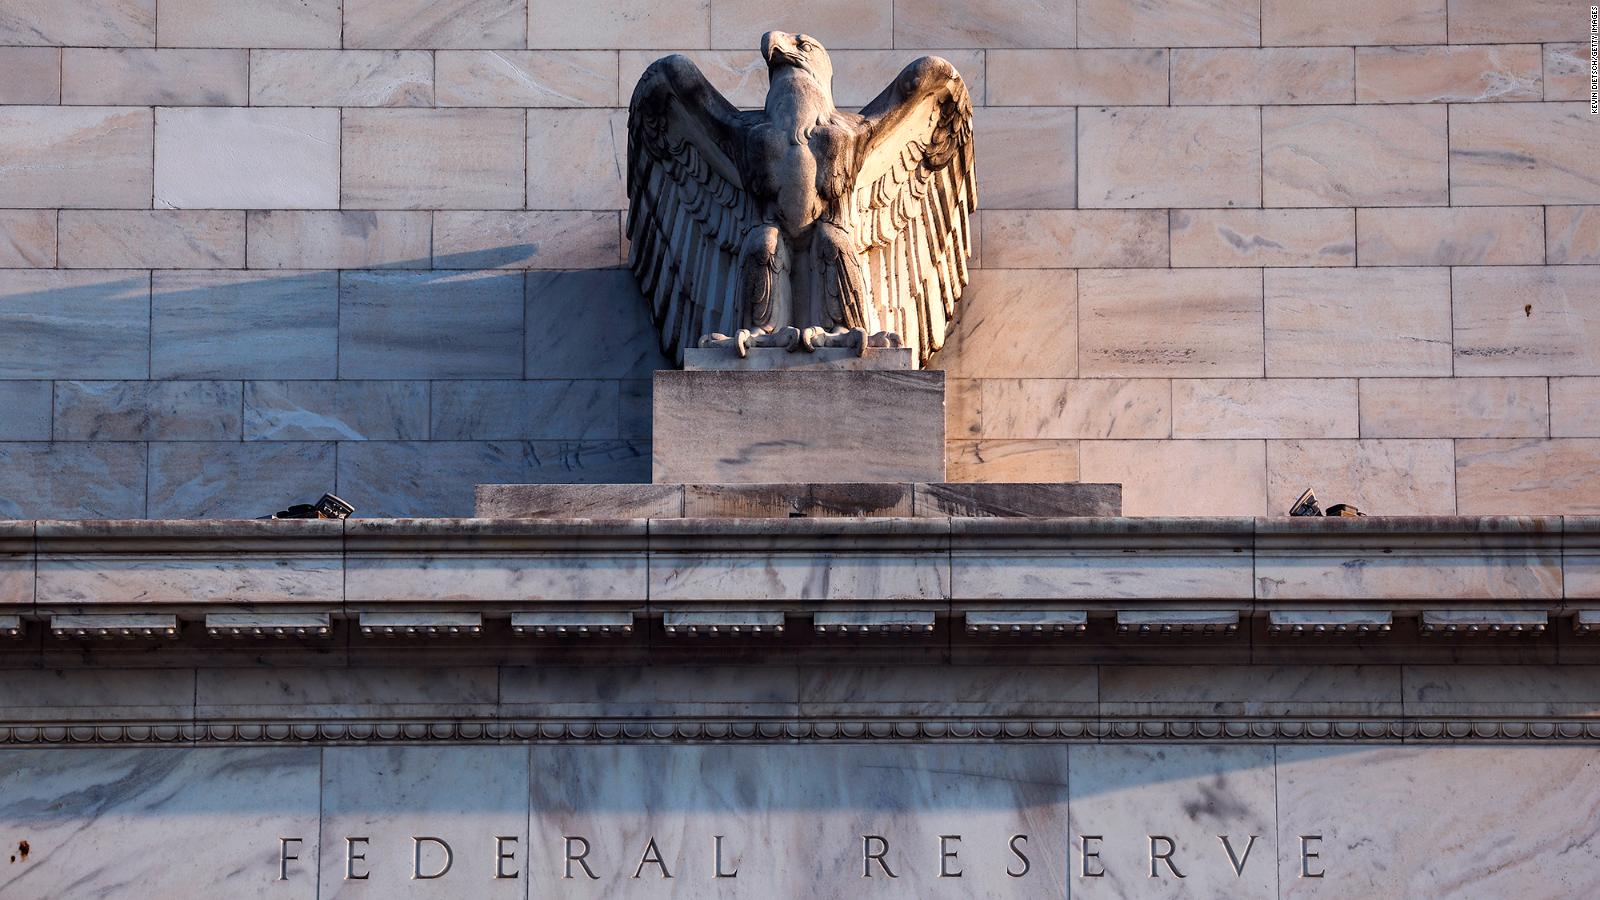 The Fed is pausing interest rate hikes while it reviews more data